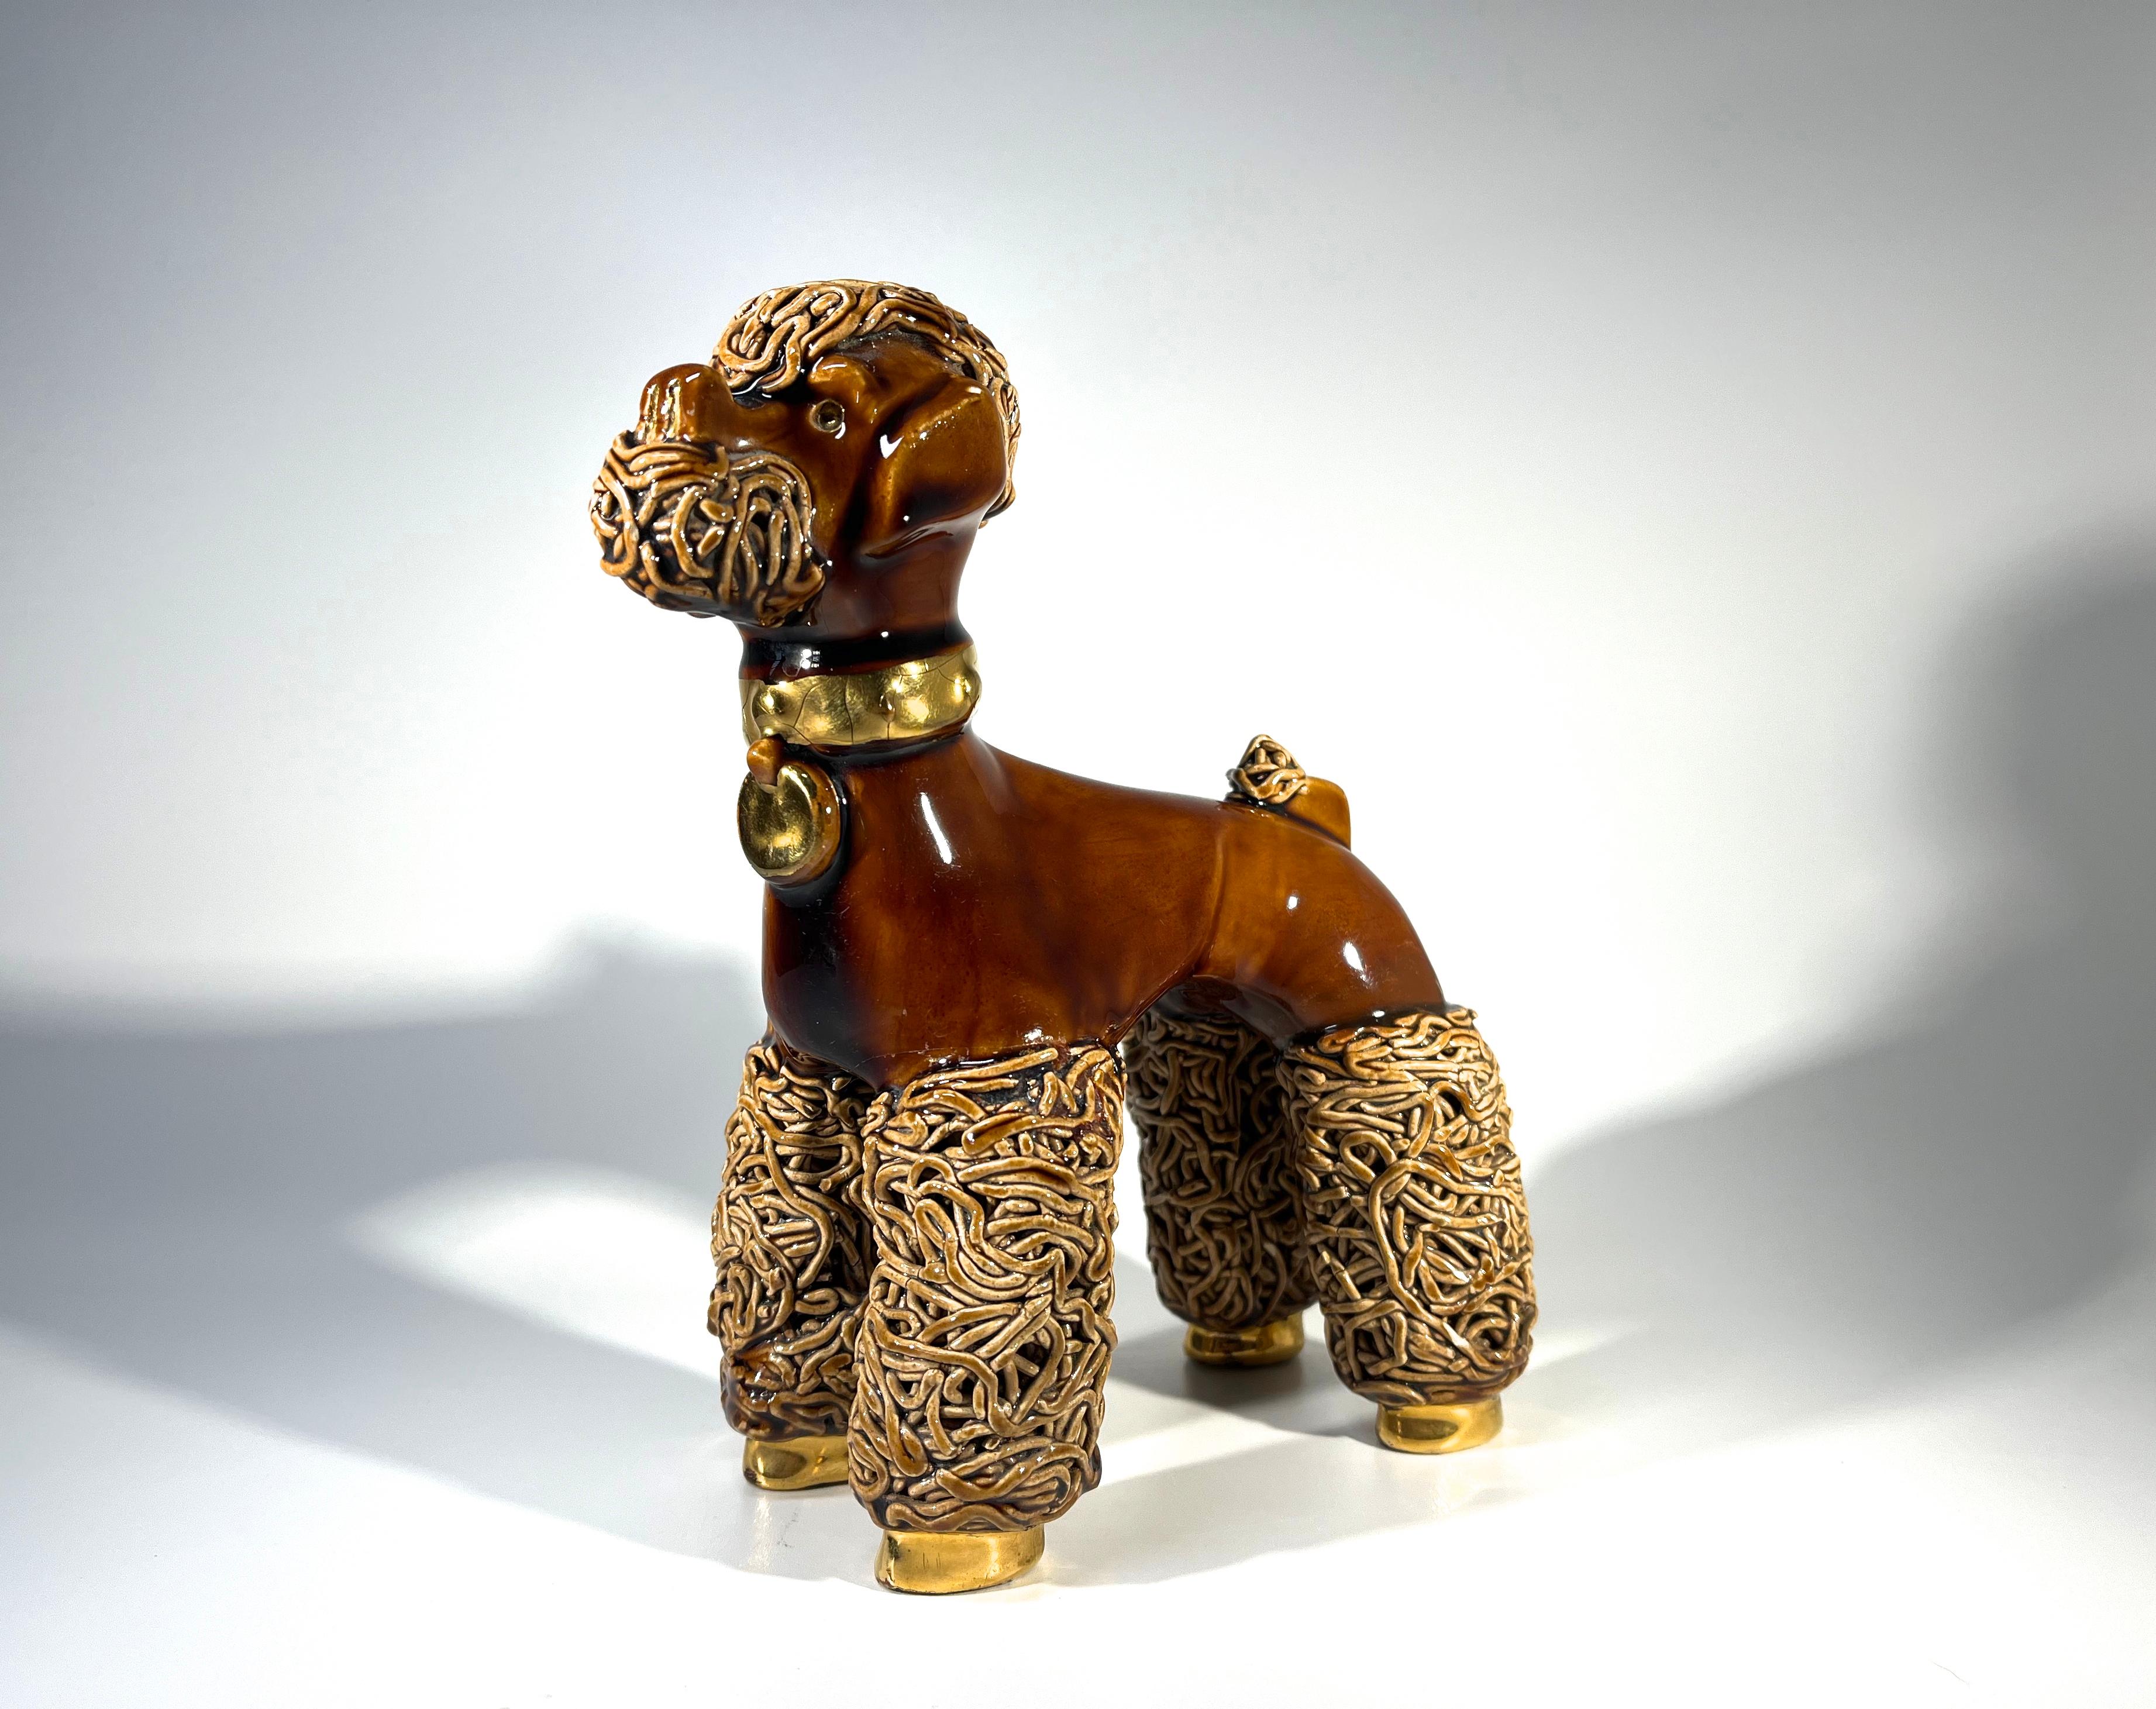 Sporting a 'Dutch Cut' to his coat, this adorable ceramic poodle stands tall and proud
Collar and feet are gilded, the glaze is a delicious toffee caramel colour and the eyes are pink glass.
Understood to have resided on a lady's nightstand
Circa